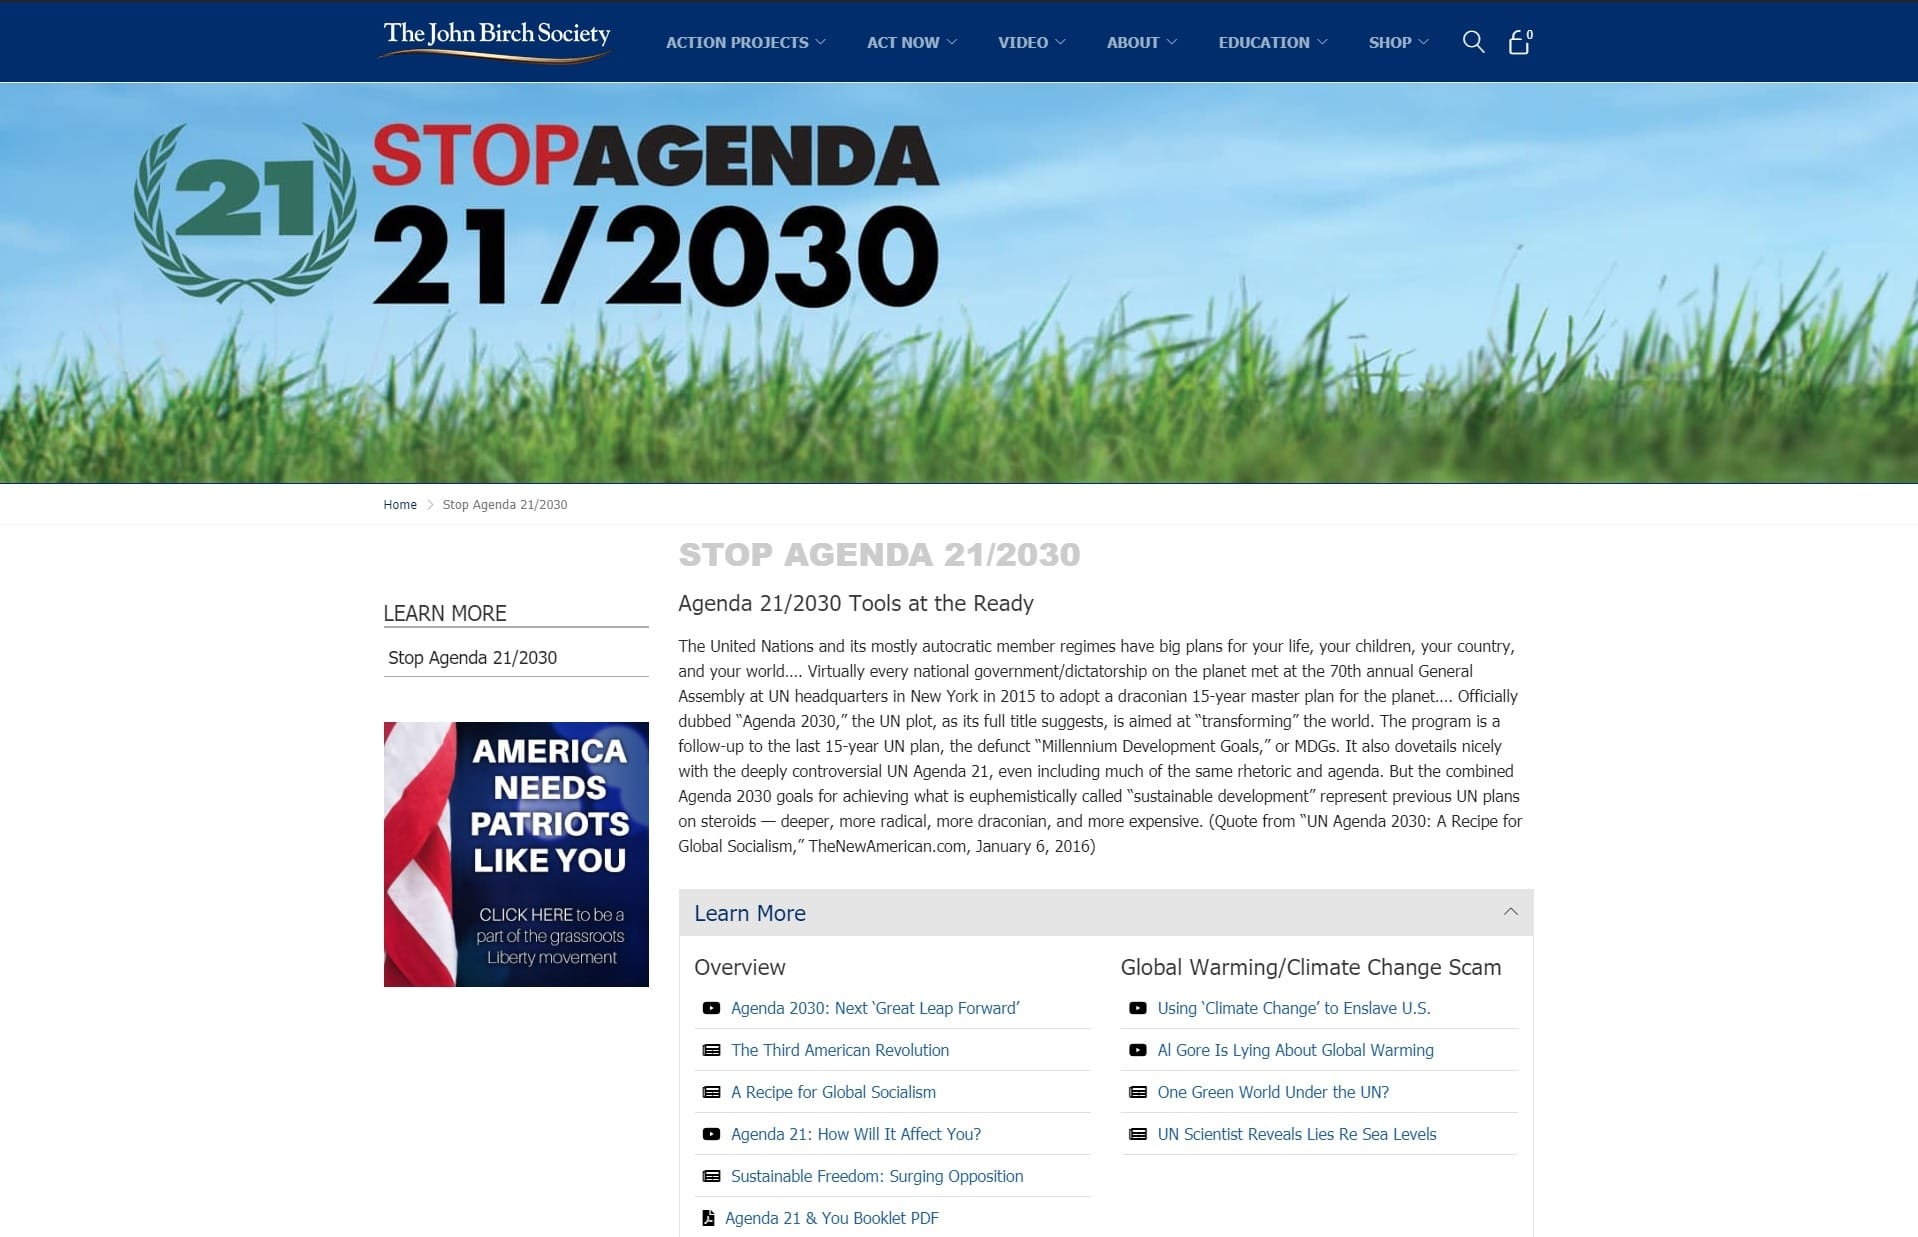 Stop Agenda 21 30 Action Project Launches The John Birch Society